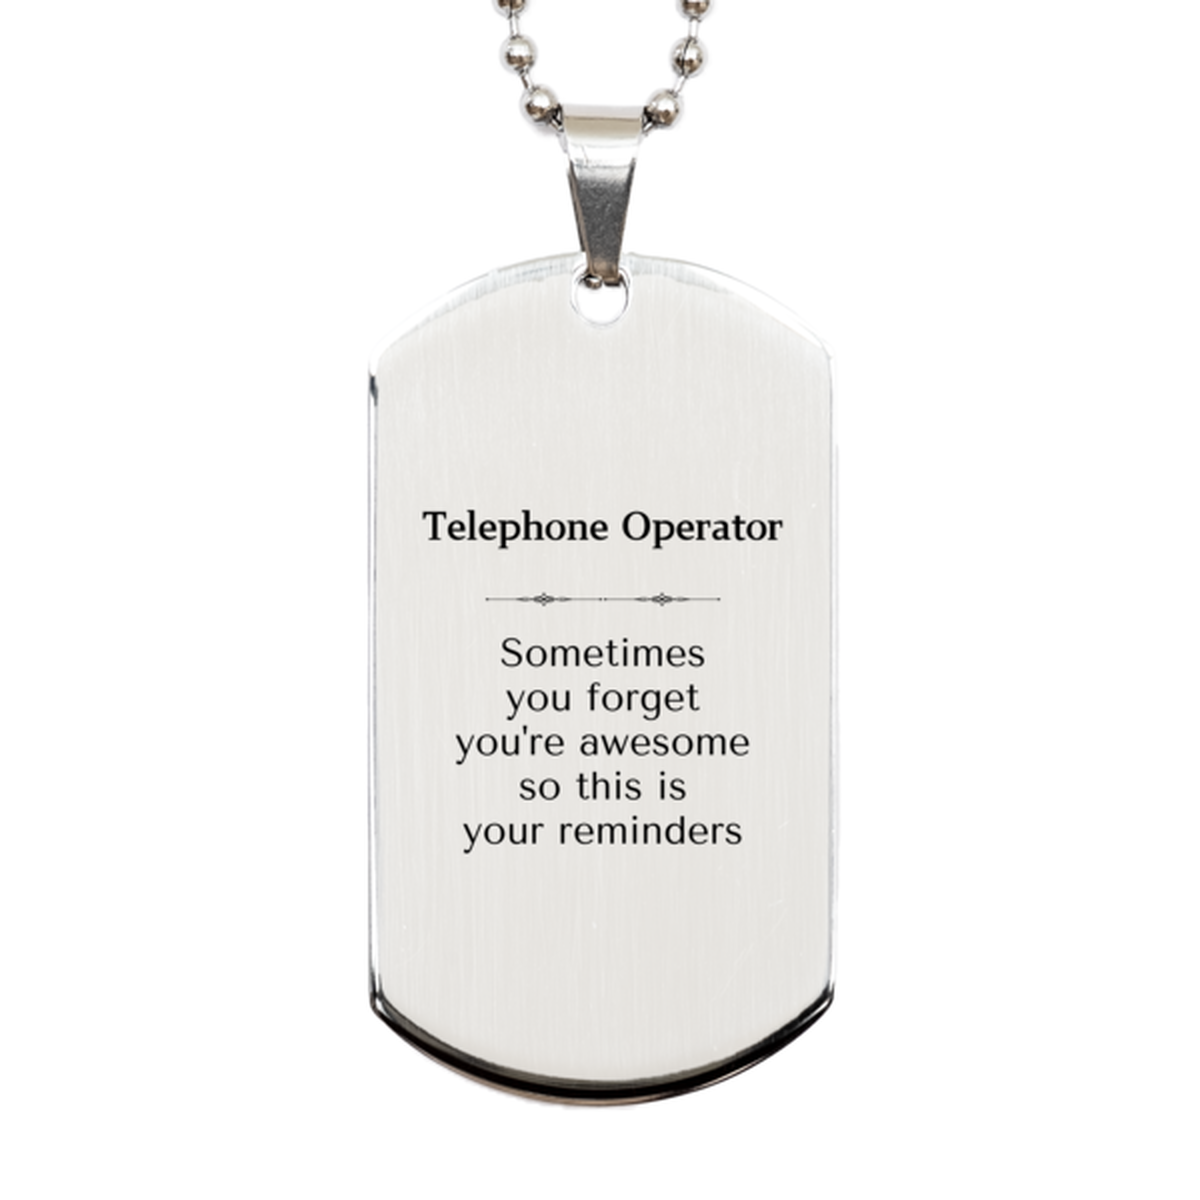 Sentimental Telephone Operator Silver Dog Tag, Telephone Operator Sometimes you forget you're awesome so this is your reminders, Graduation Christmas Birthday Gifts for Telephone Operator, Men, Women, Coworkers